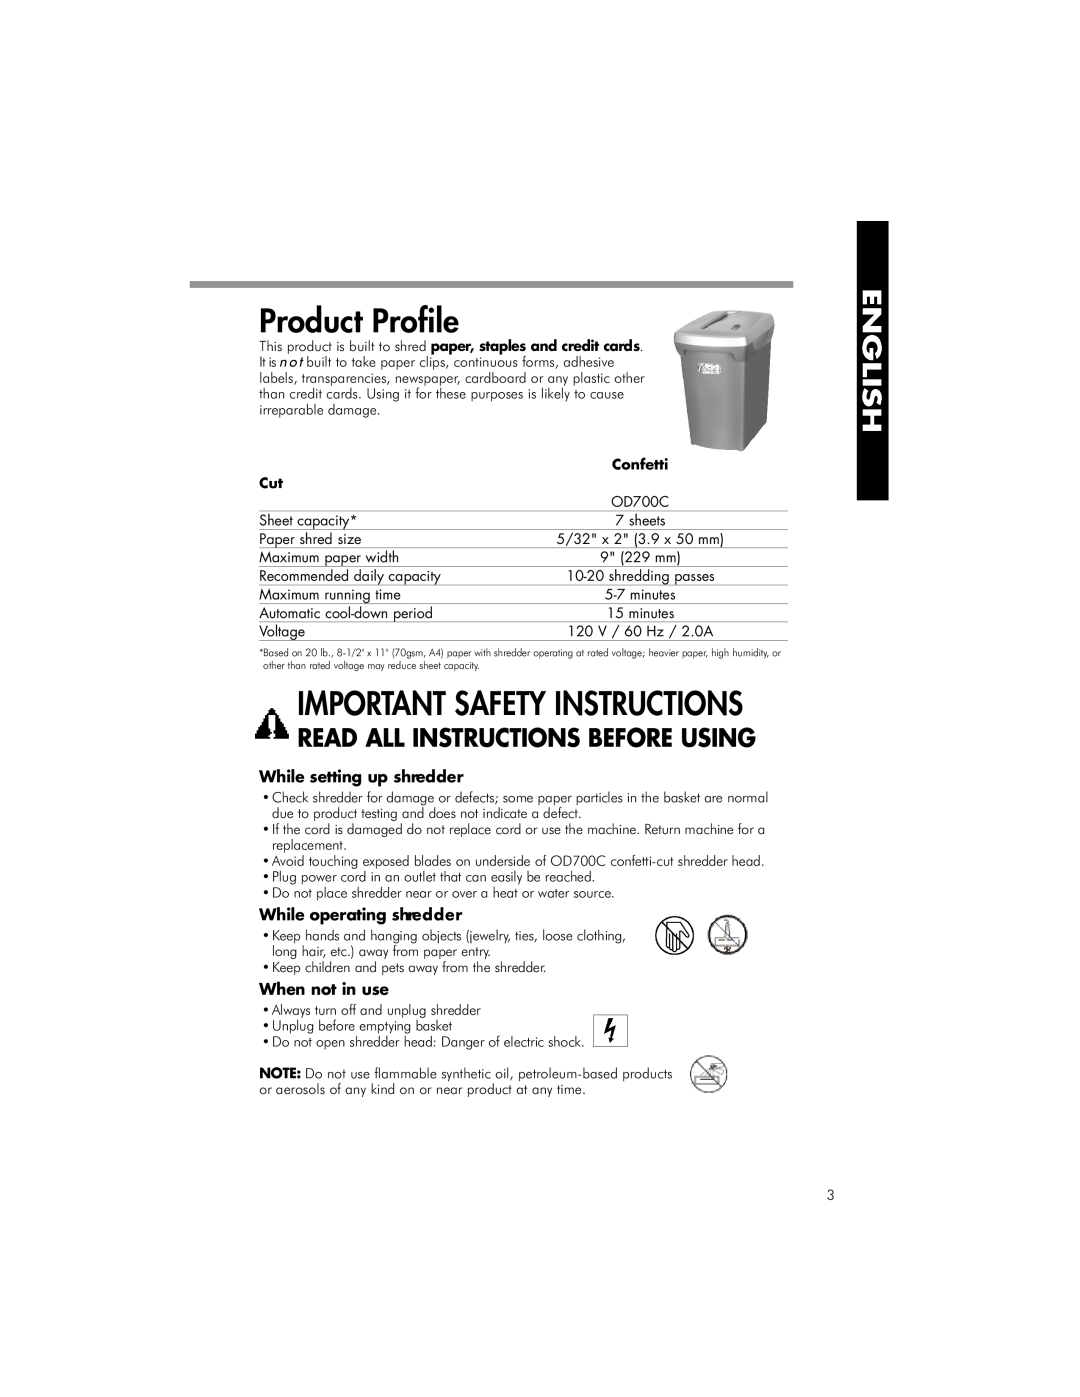 Fellowes P70CM manual Product Profile, Important Safety Instructions, While setting up shredder, While operating shredder 